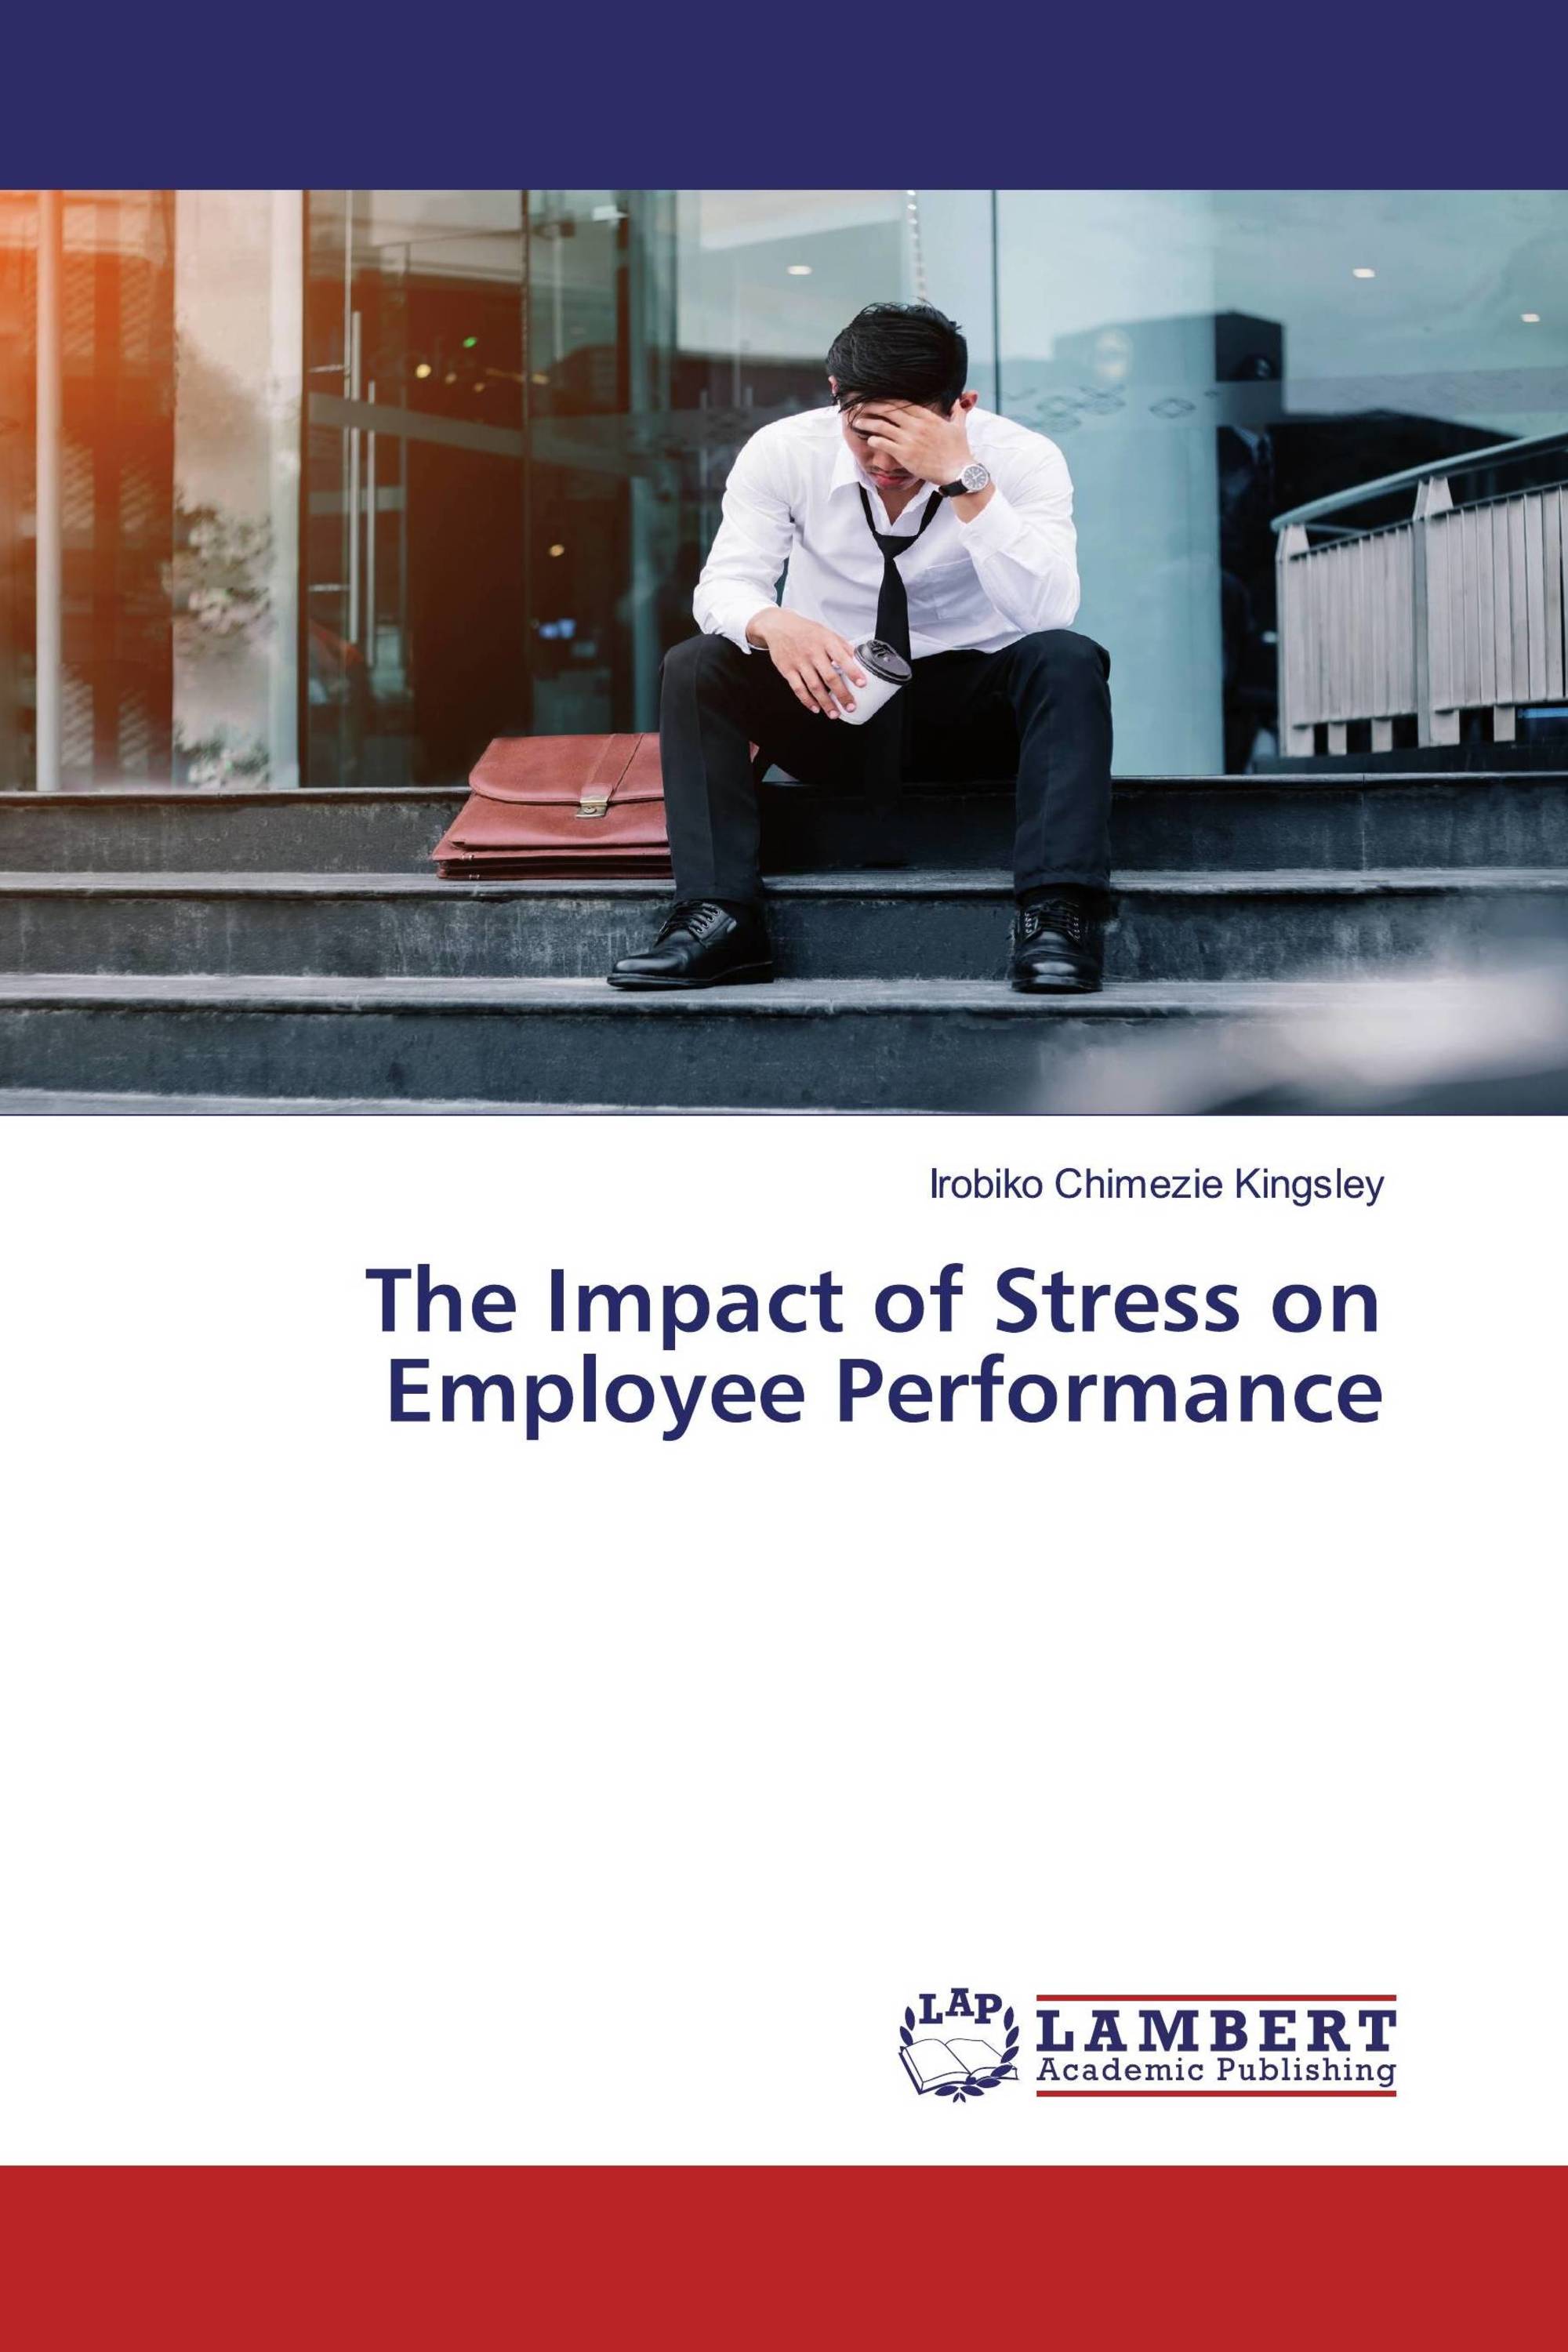 thesis on stress and job performance